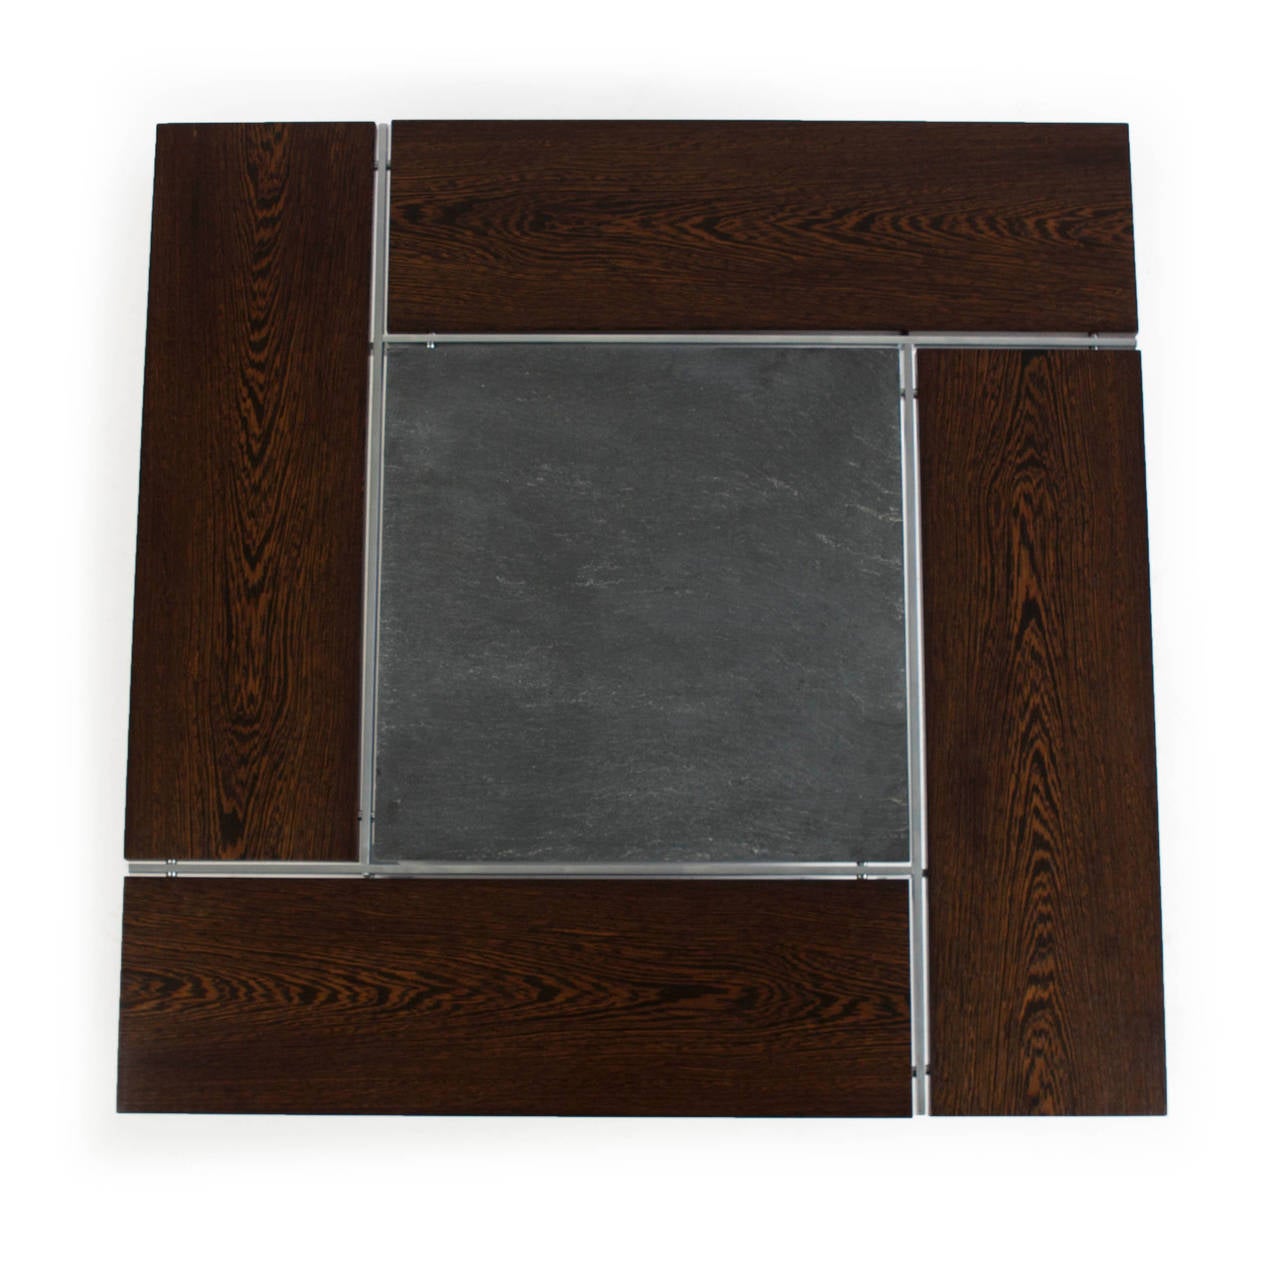 A square coffee table with top of wengé and slate, frame of matt chromed steel.

Designed by Preben Fabricius & Jørgen Kastholm 1960's and manufactured by Bo-Ex, Denmark as model BO 750.